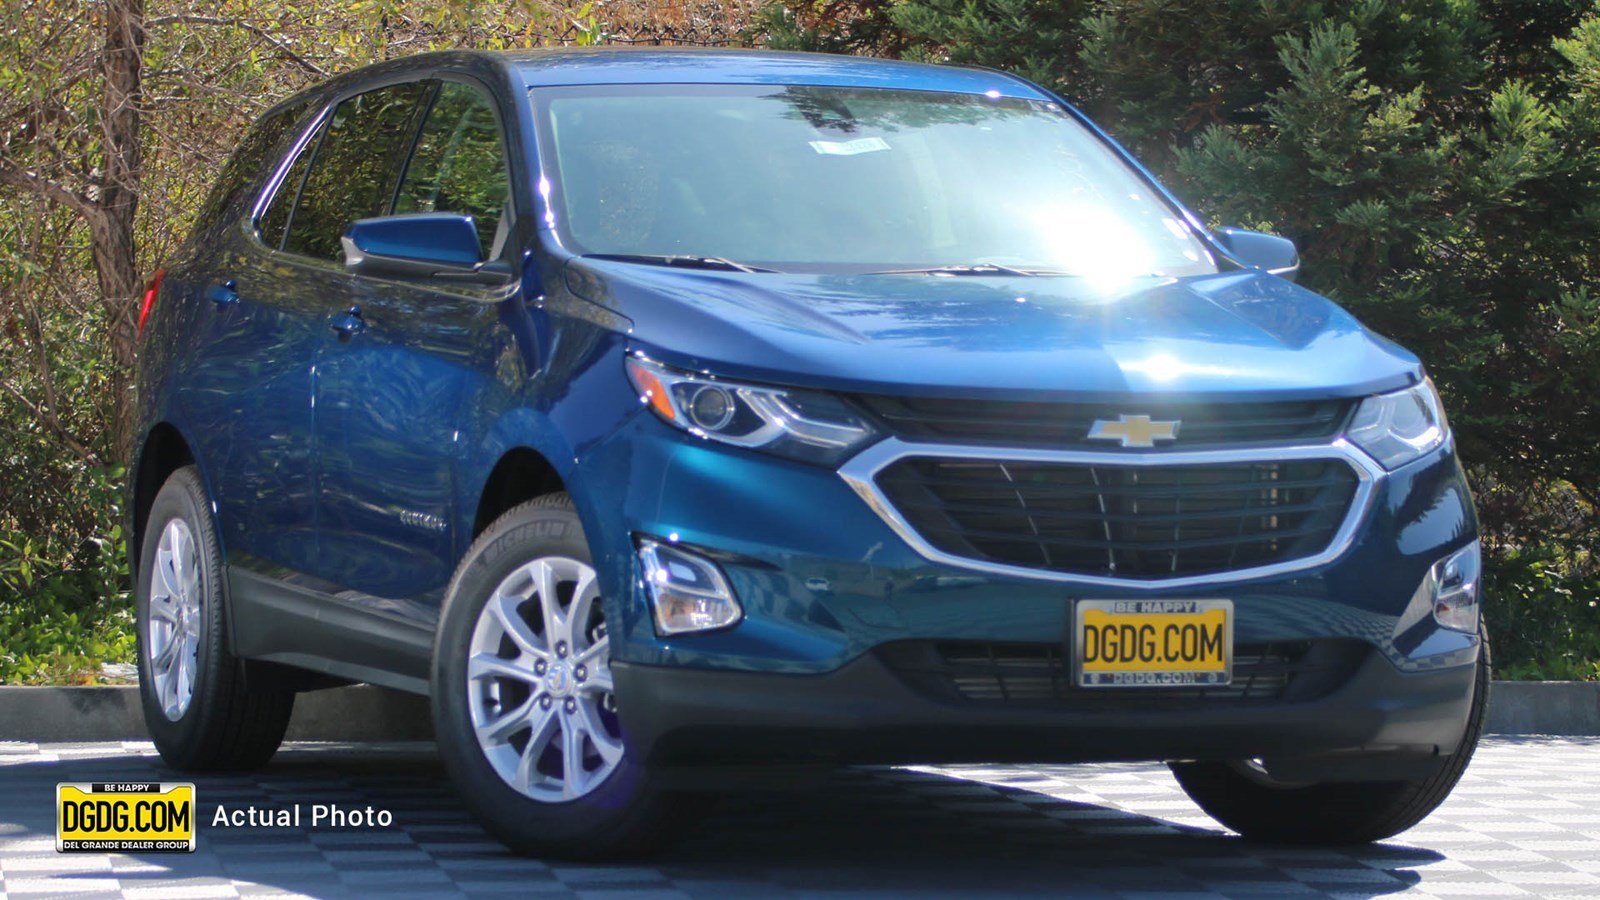 2014 Chevy Equinox Color Chart